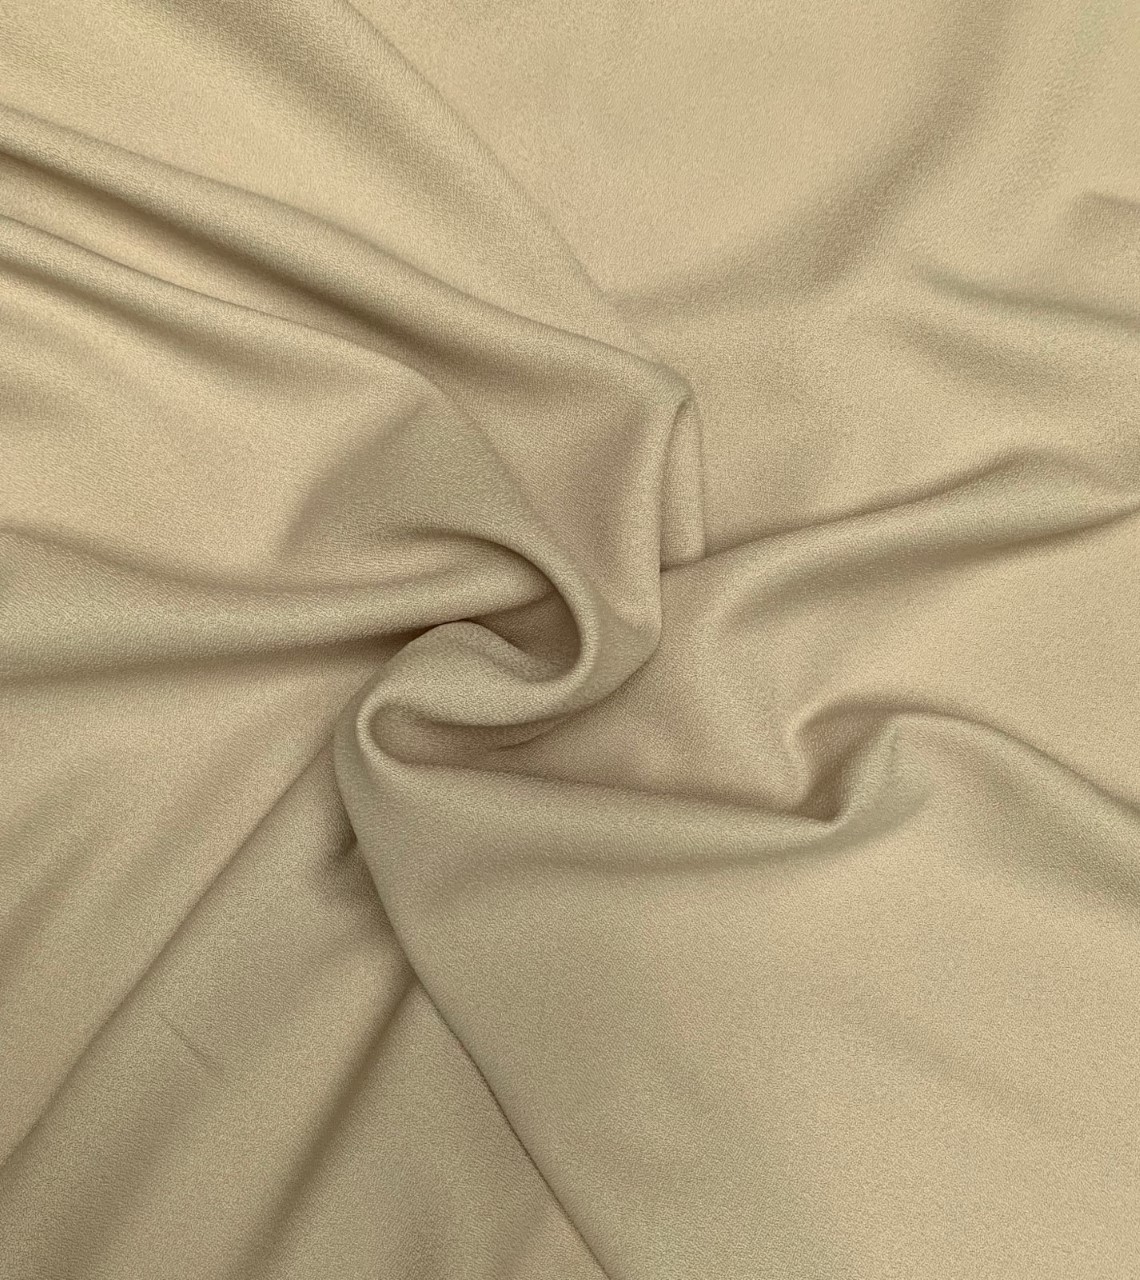 60" Wide Khaki Crepe- By the yard (100% Polyester)